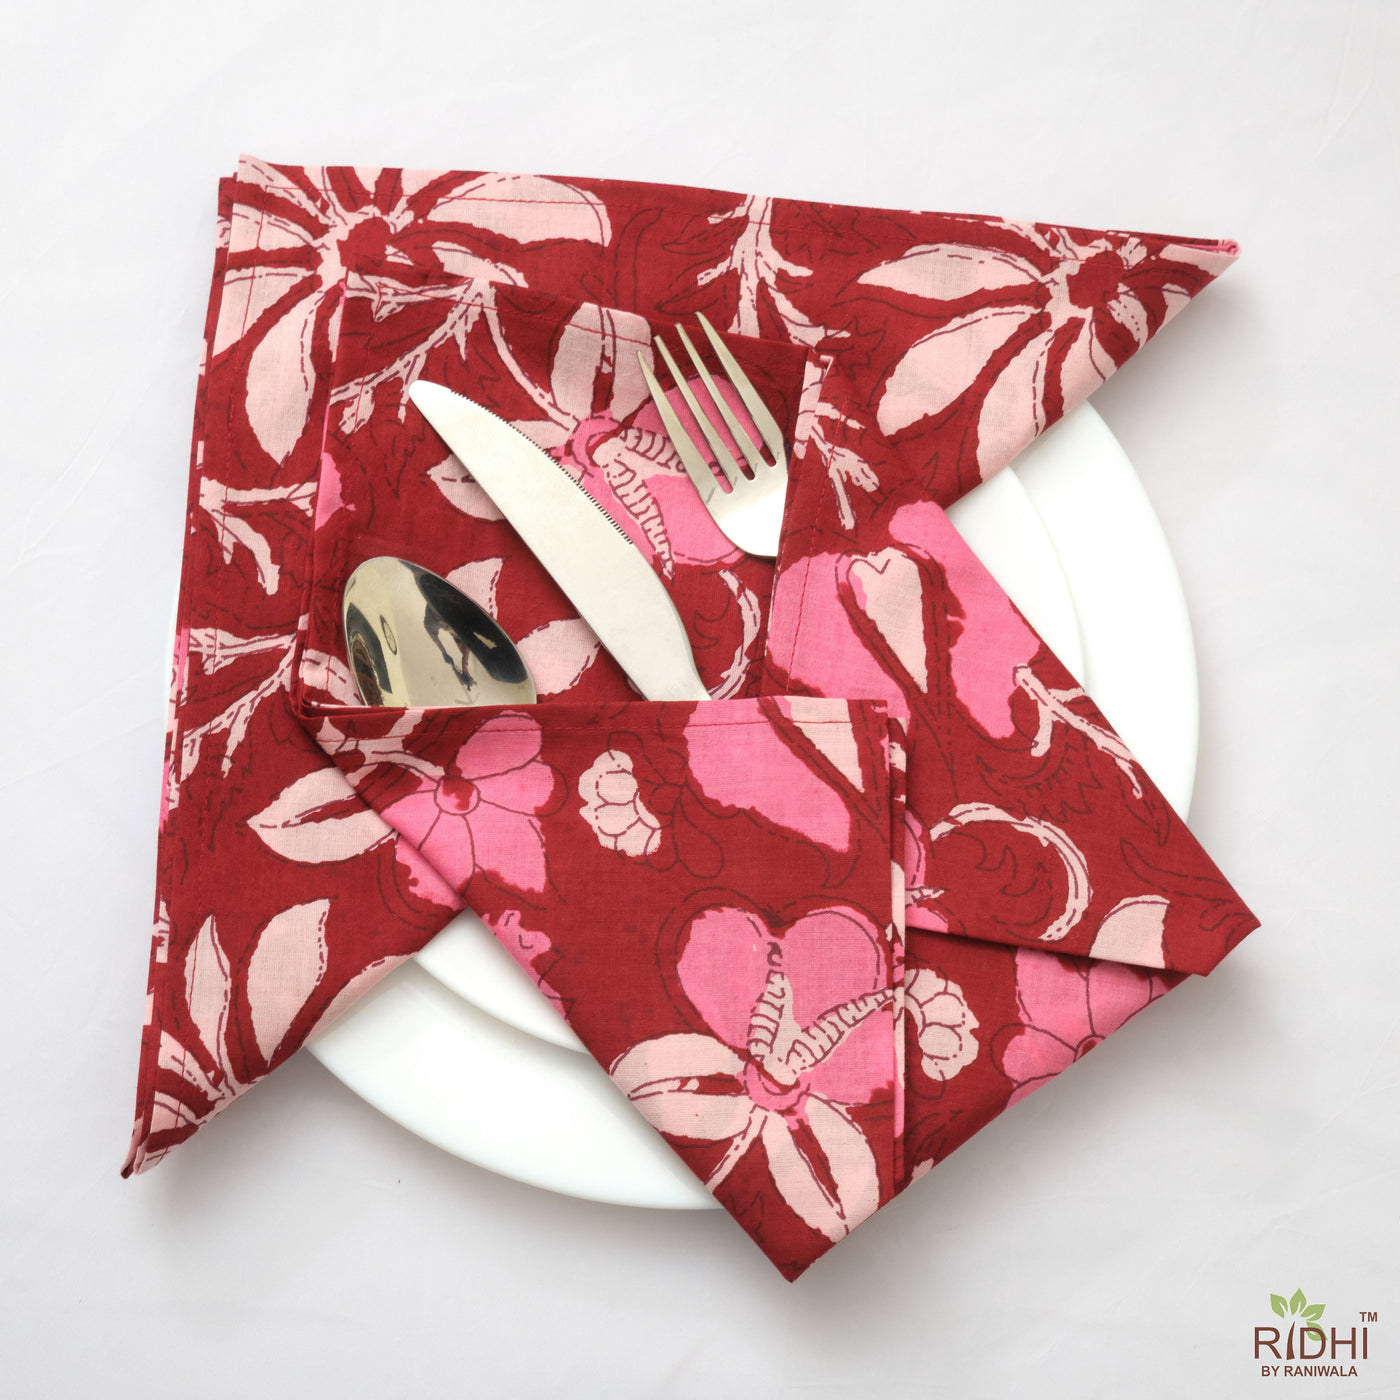 Fabricrush Mahogany, Thulian and Watermelon Pink Floral Indian Printed 100% Pure Cotton Cloth Napkins, 18x18"- Cocktail Napkins, 20x20"- Dinner Napkins